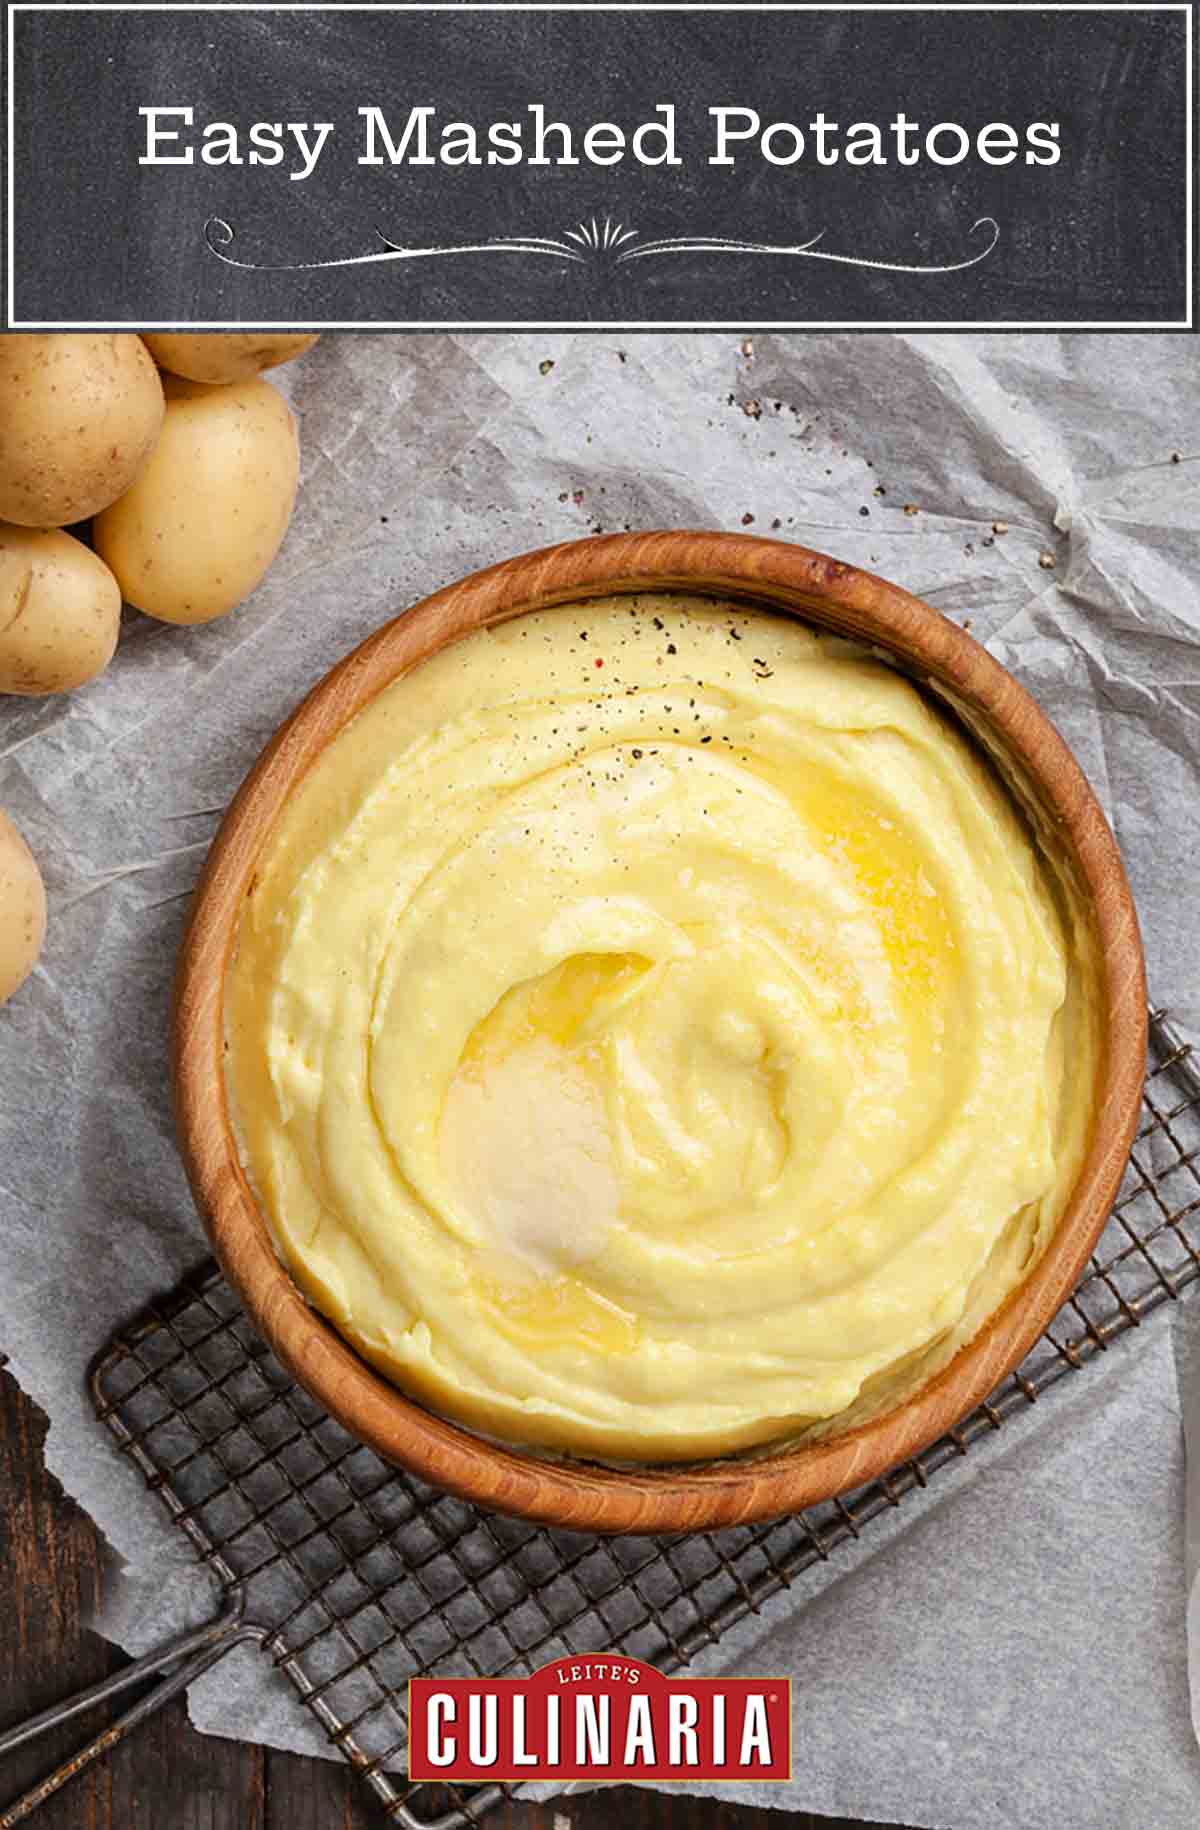 A wooden bowl filled with mashed potatoes and topped with a melted square of butter.